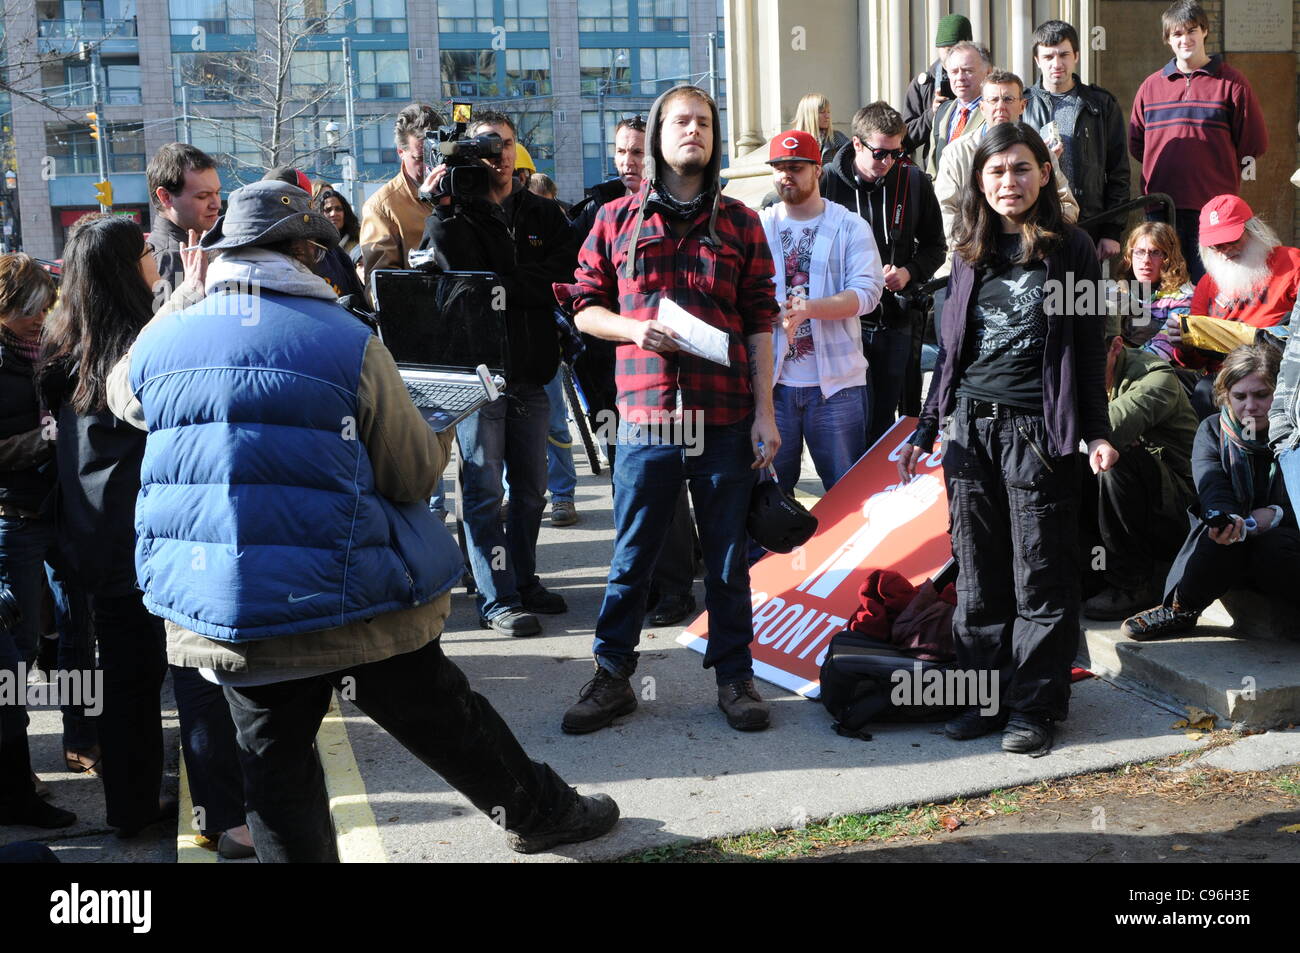 November 15, 2011, a group of Occupy Toronto protesters hold a noon hour general assembly in front of St. James Church to discuss their options following the delivery of an eviction notice, requiring the protesters to vacate St. James Park as of 12:01am, November 16, 2011. Stock Photo